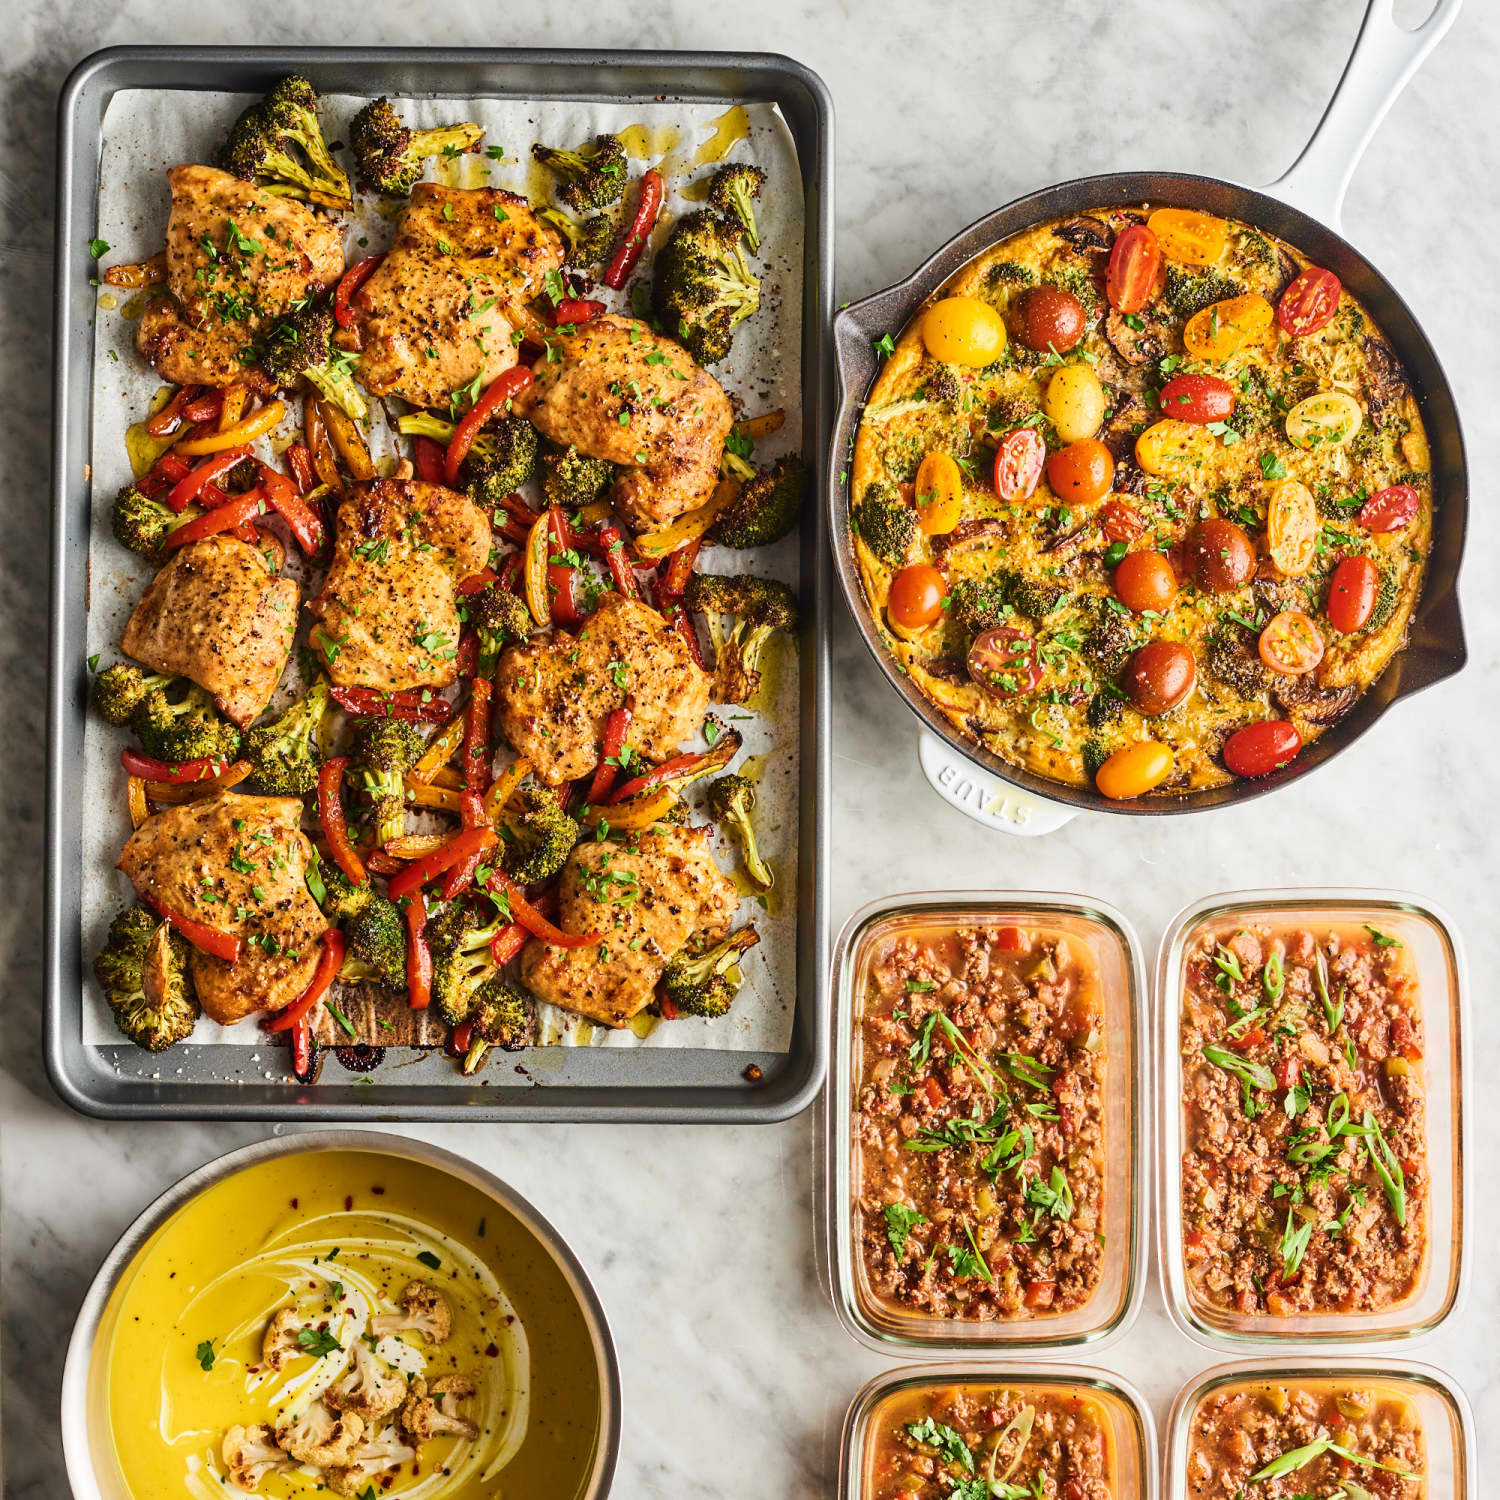 30 Minute Meal Prep Recipes for this Week - An Unblurred Lady